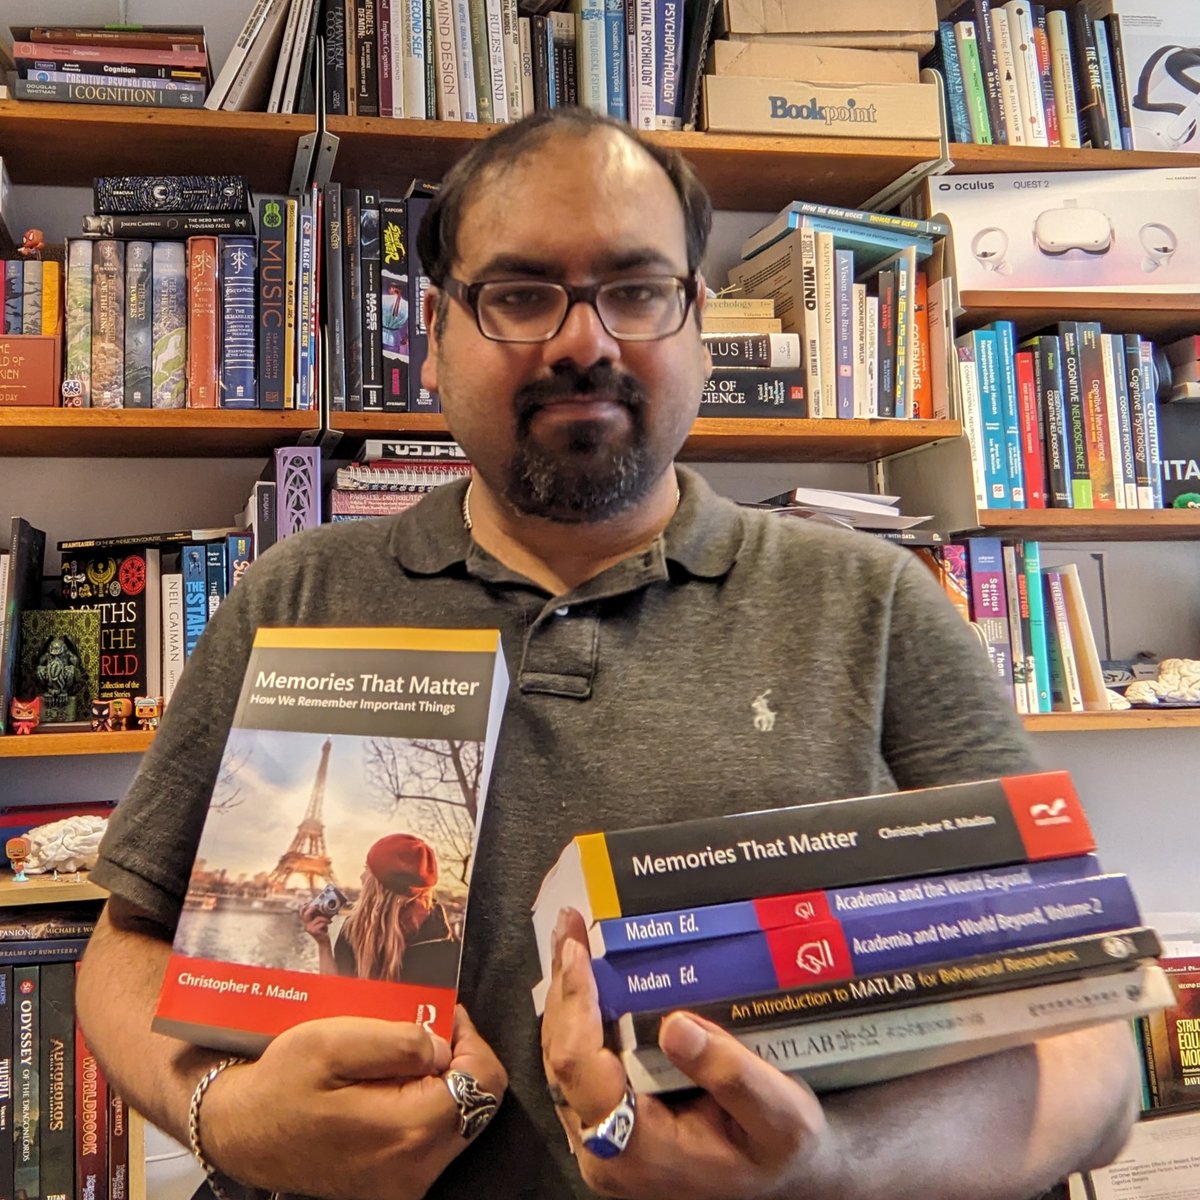 Just got my print copies of 'Memories that Matter'! Here it is alongside the rest of my collection--it's a big book. (I knew it would be, but only now can see them side-by-side.) You can find out more about it here: engra.me/books/memories…